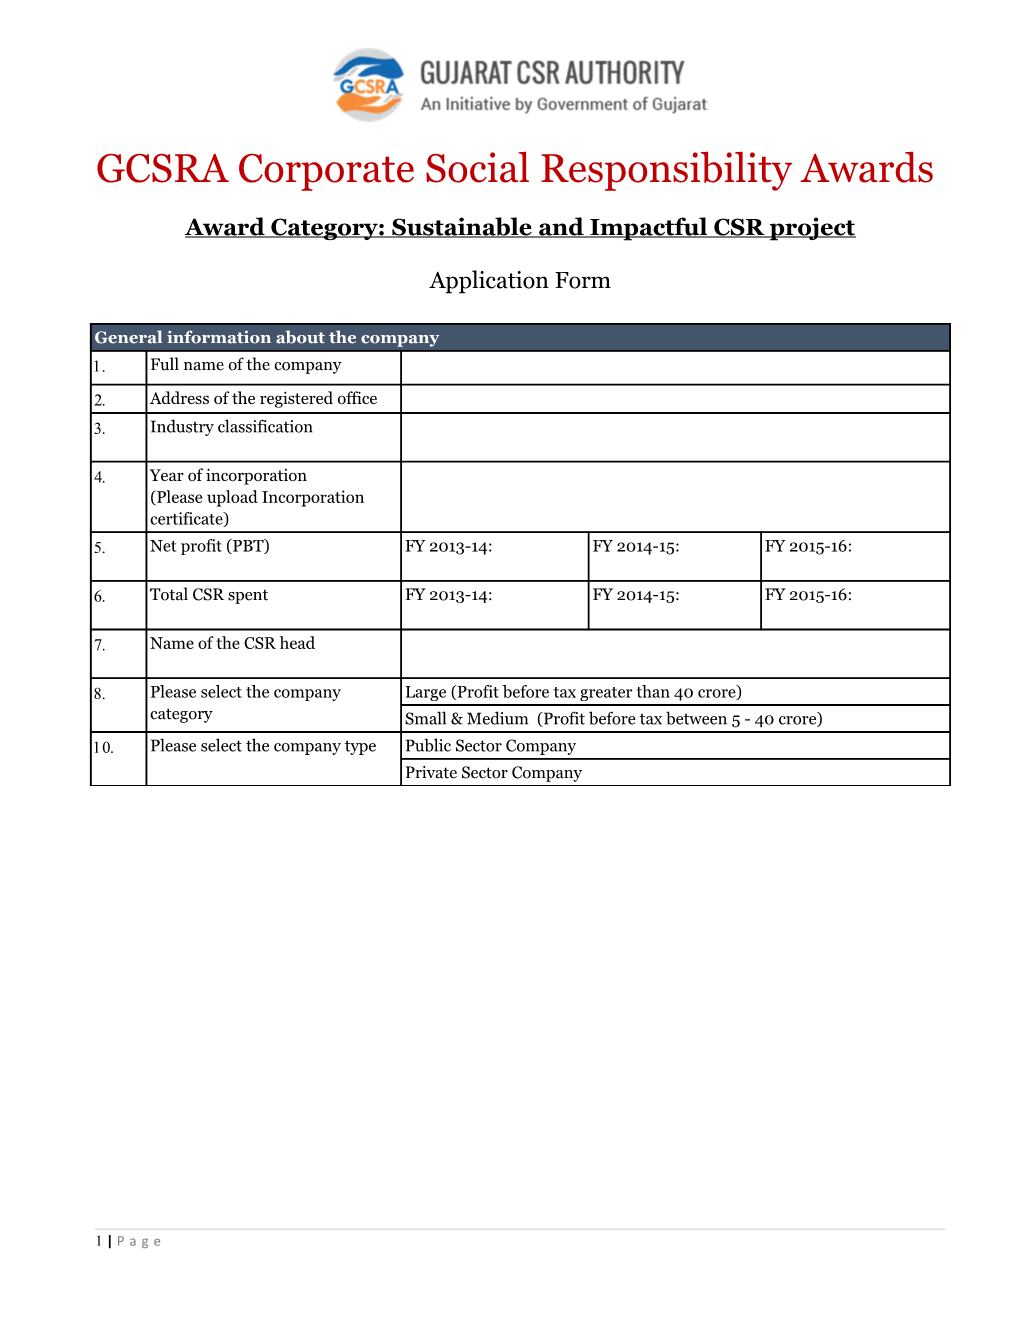 Award Category: Sustainable and Impactful CSR Project